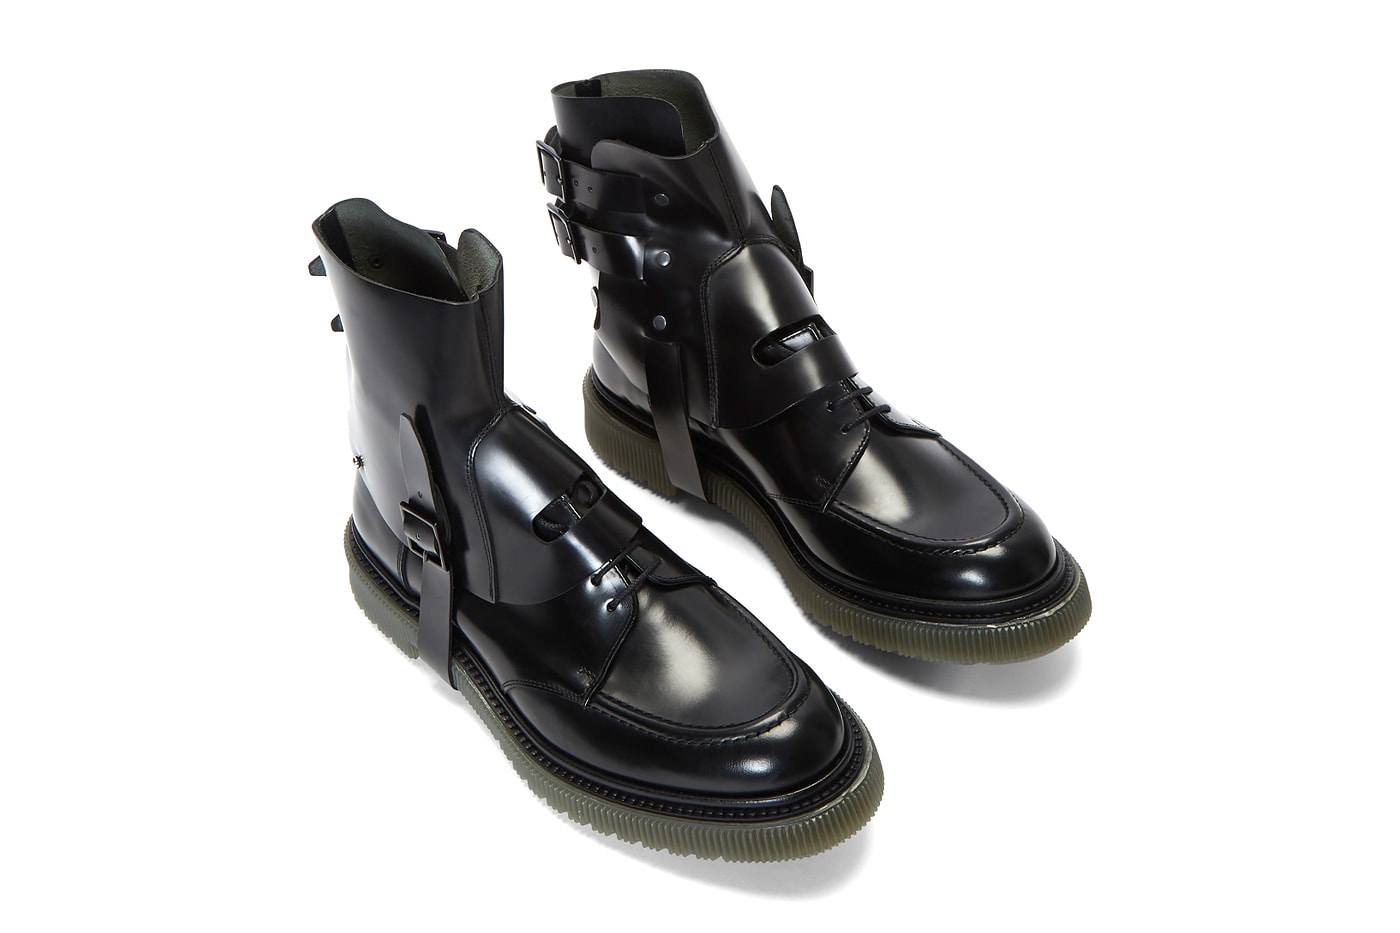 Adieu Type 134 Boots Black menswear streetwear spring summer 2020 collection shoes kicks ss20 leather